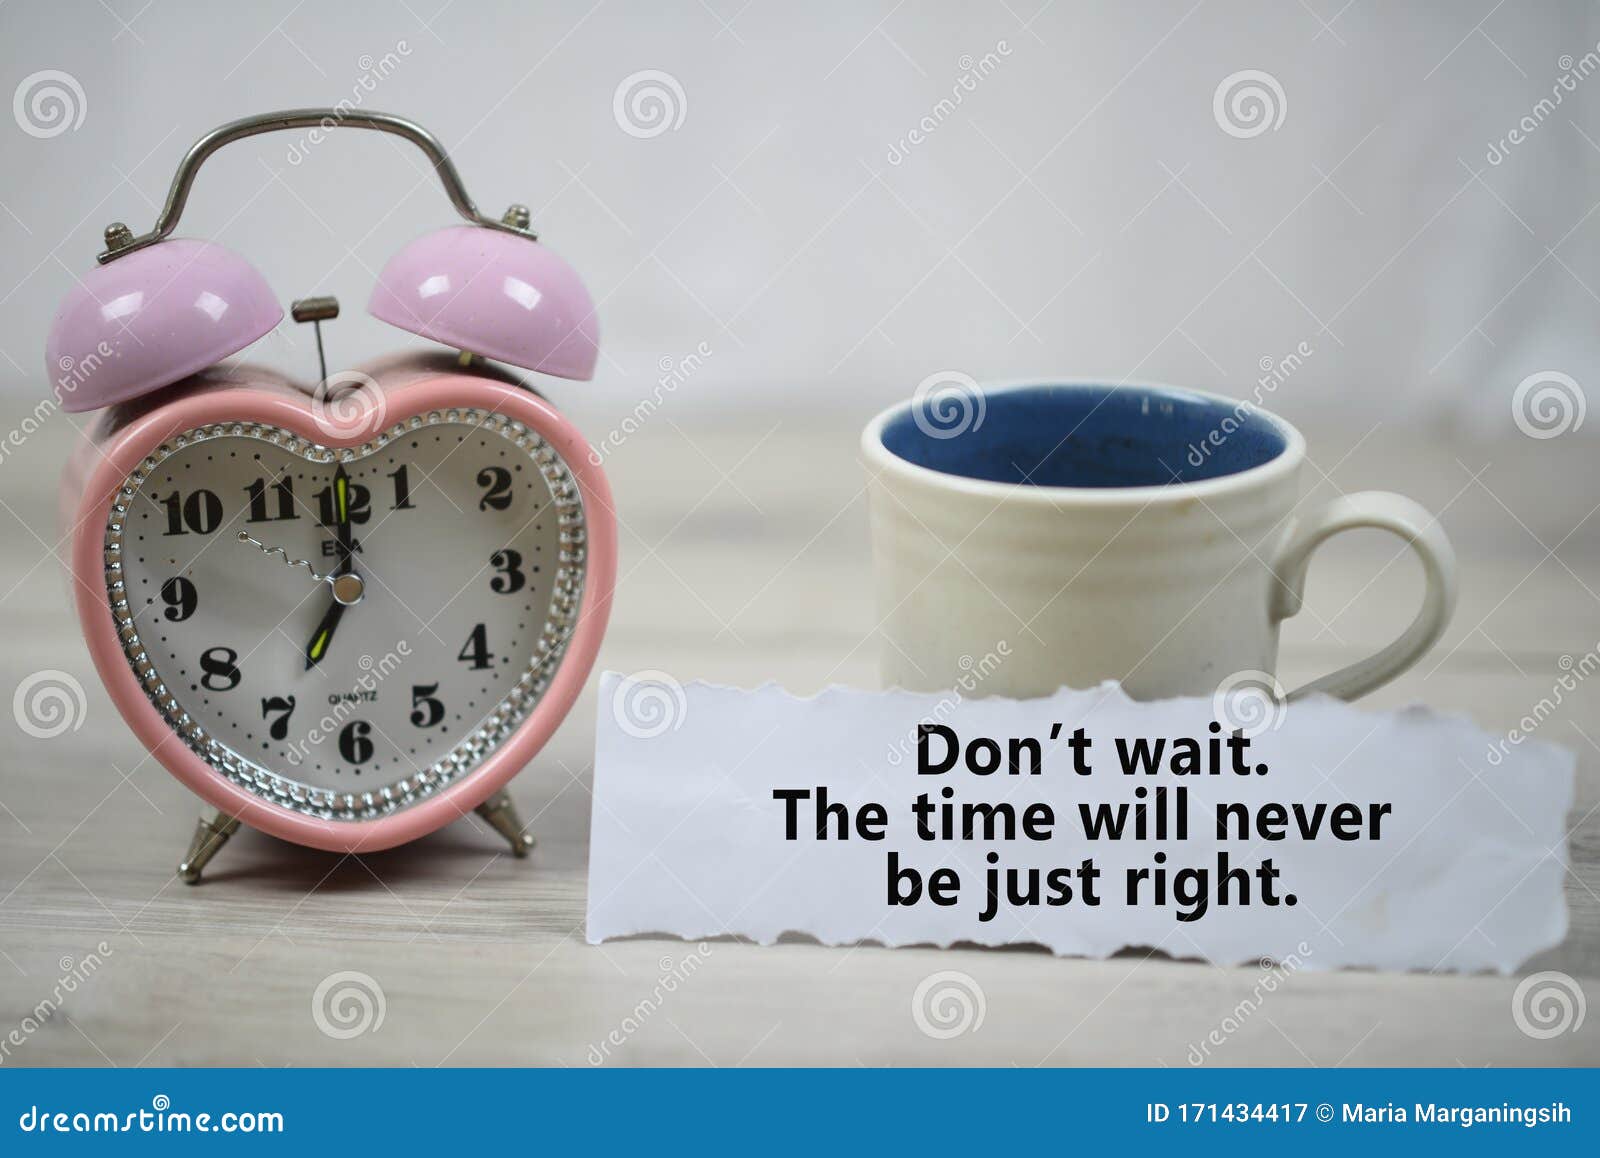 Inspirational Quote - Do Not Wait. the Time Will Never Be Just ...